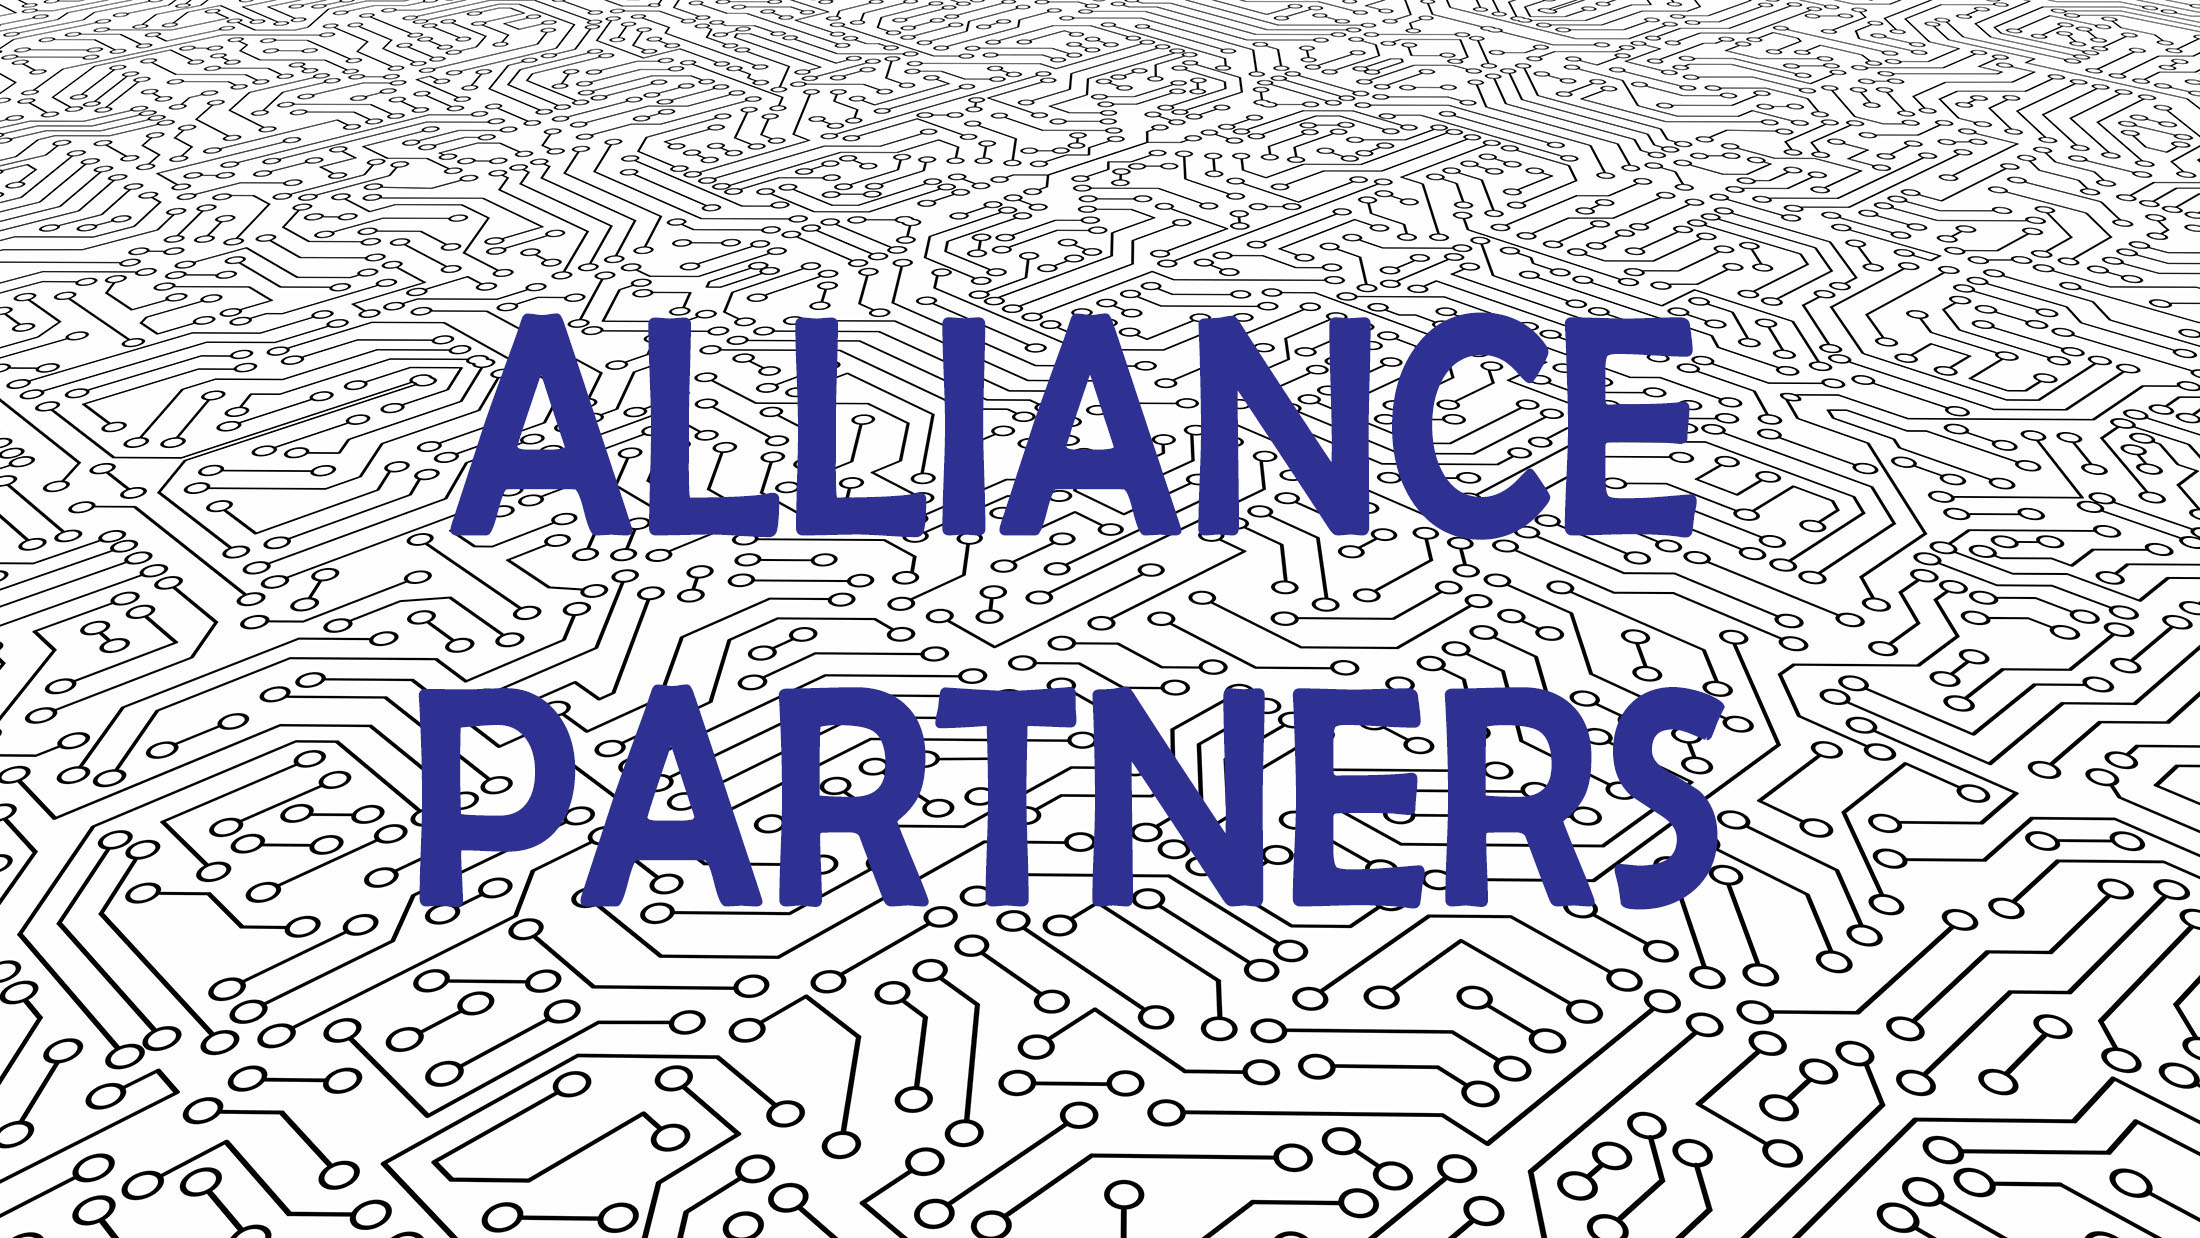 Words "Alliance Partners" over white circuit board background